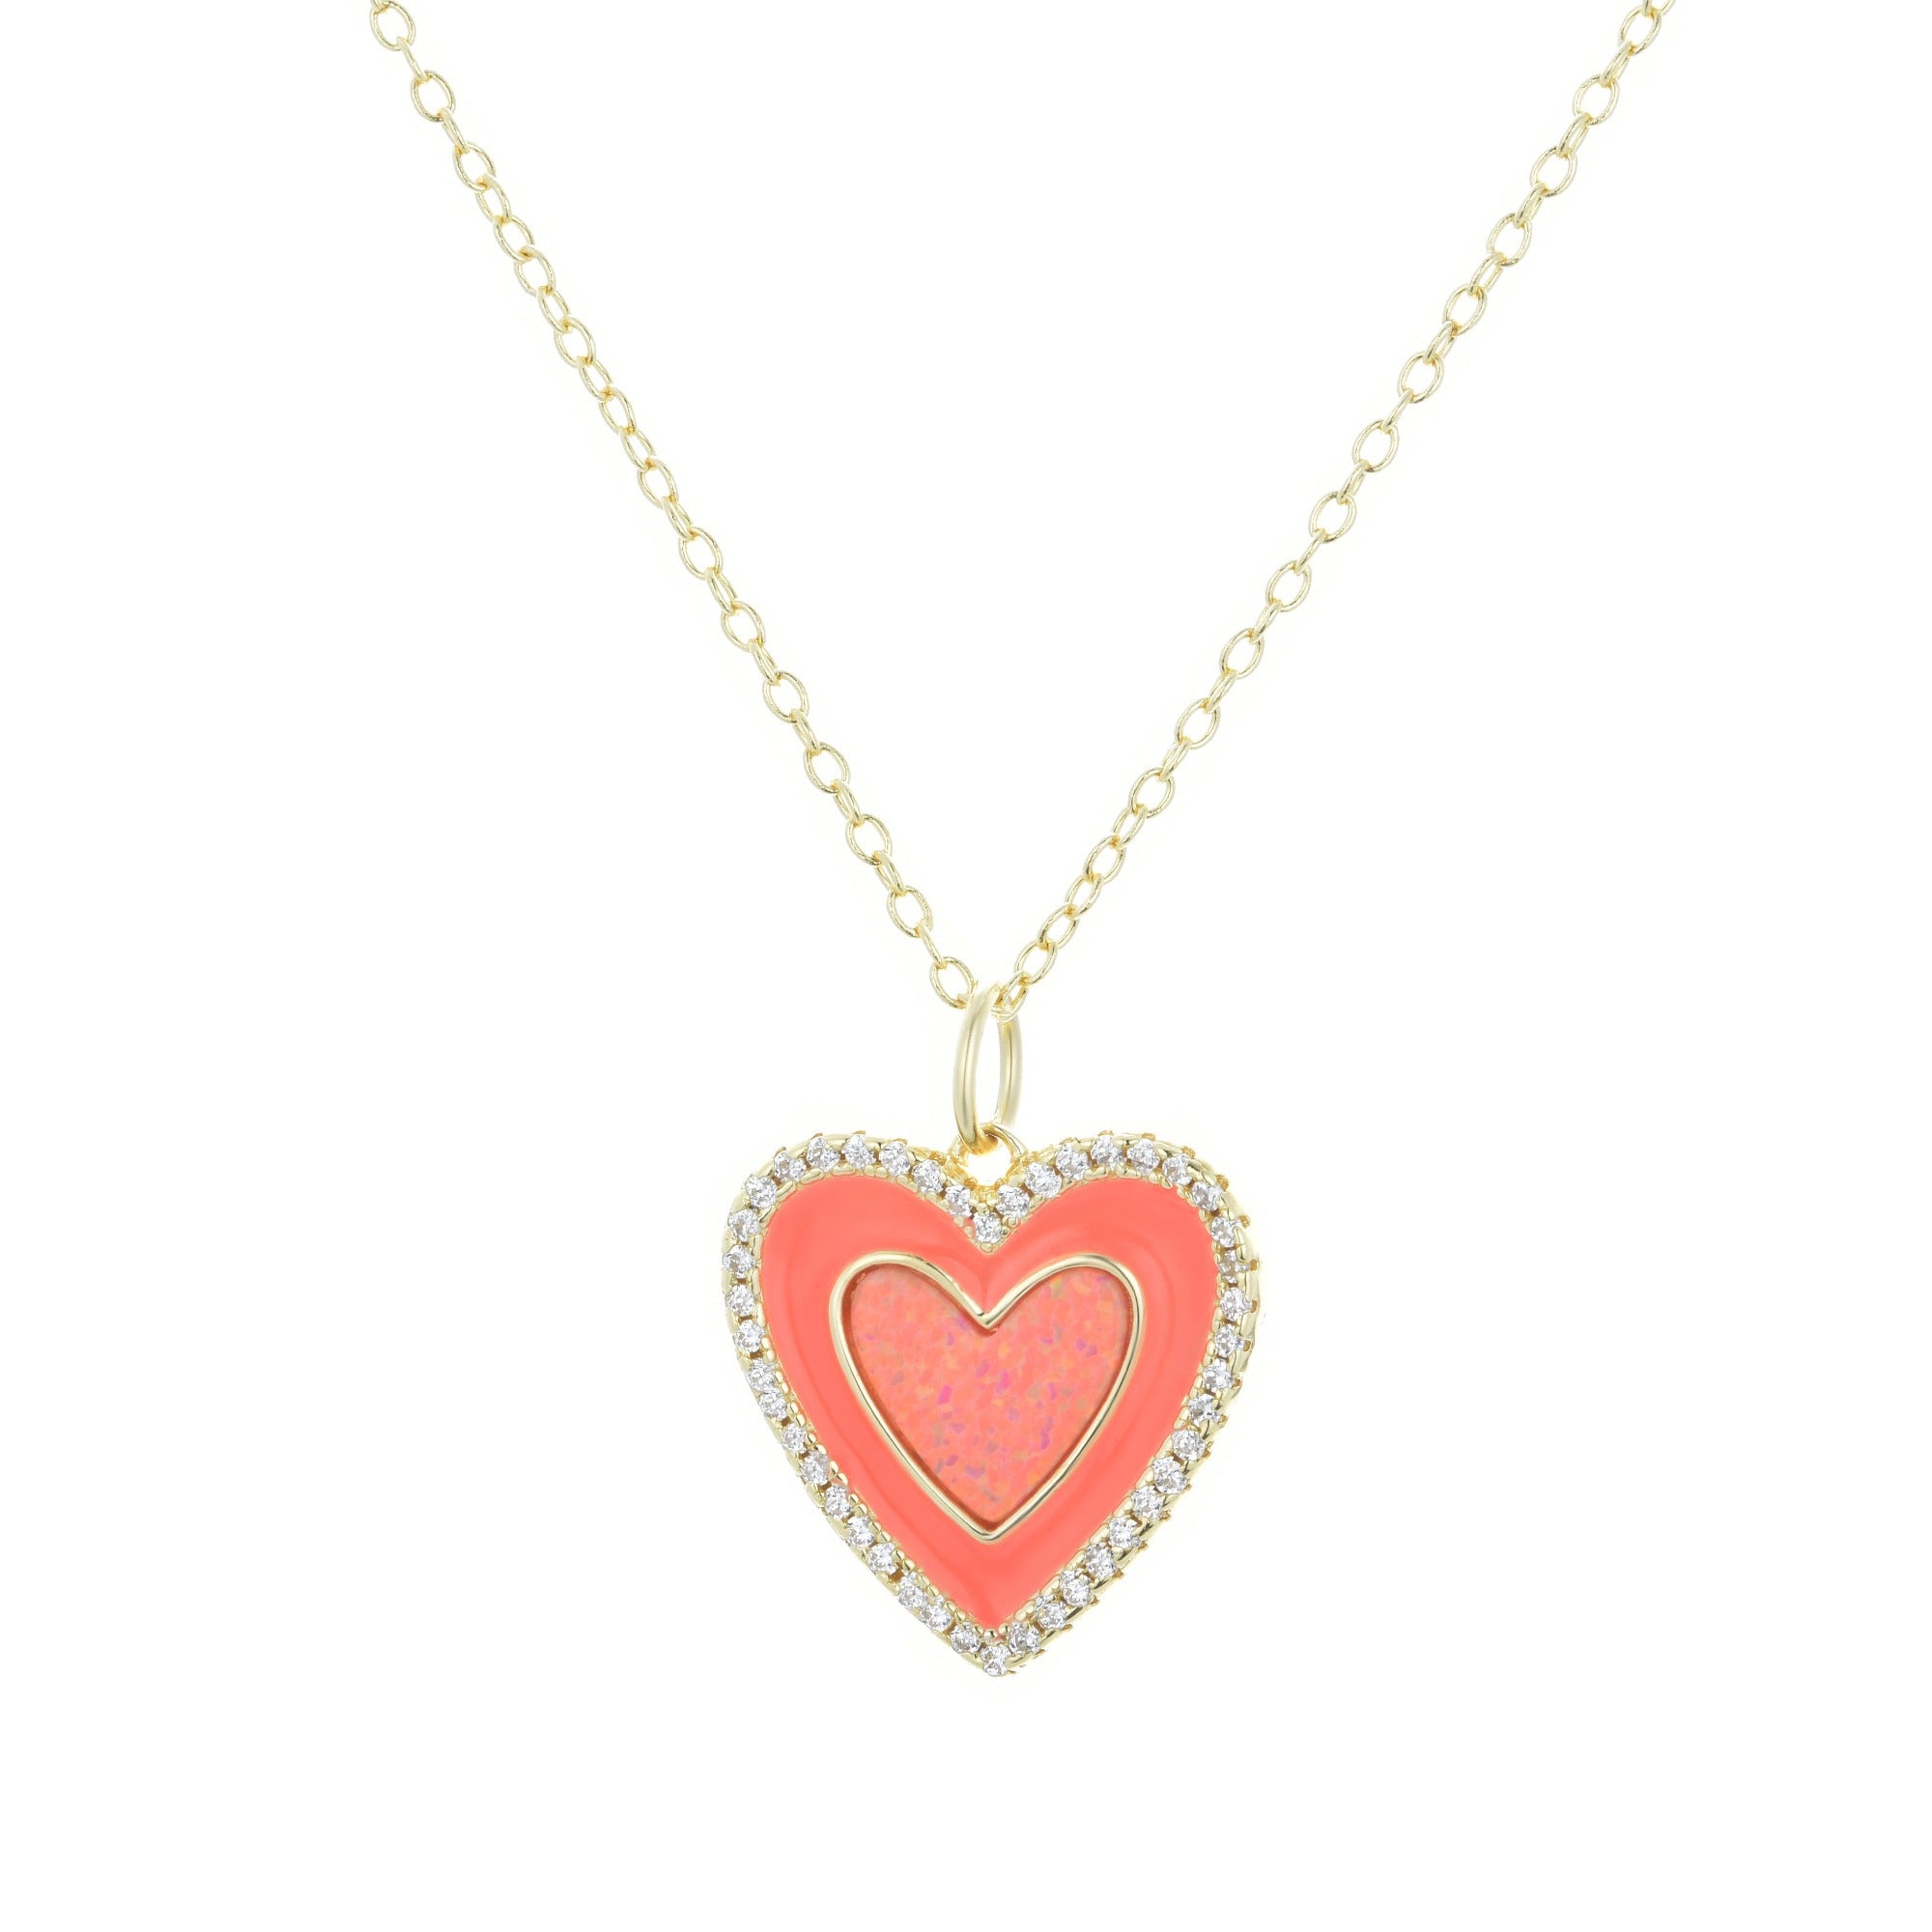 Two Tone Heart Necklace - Coral Enamel and Opal